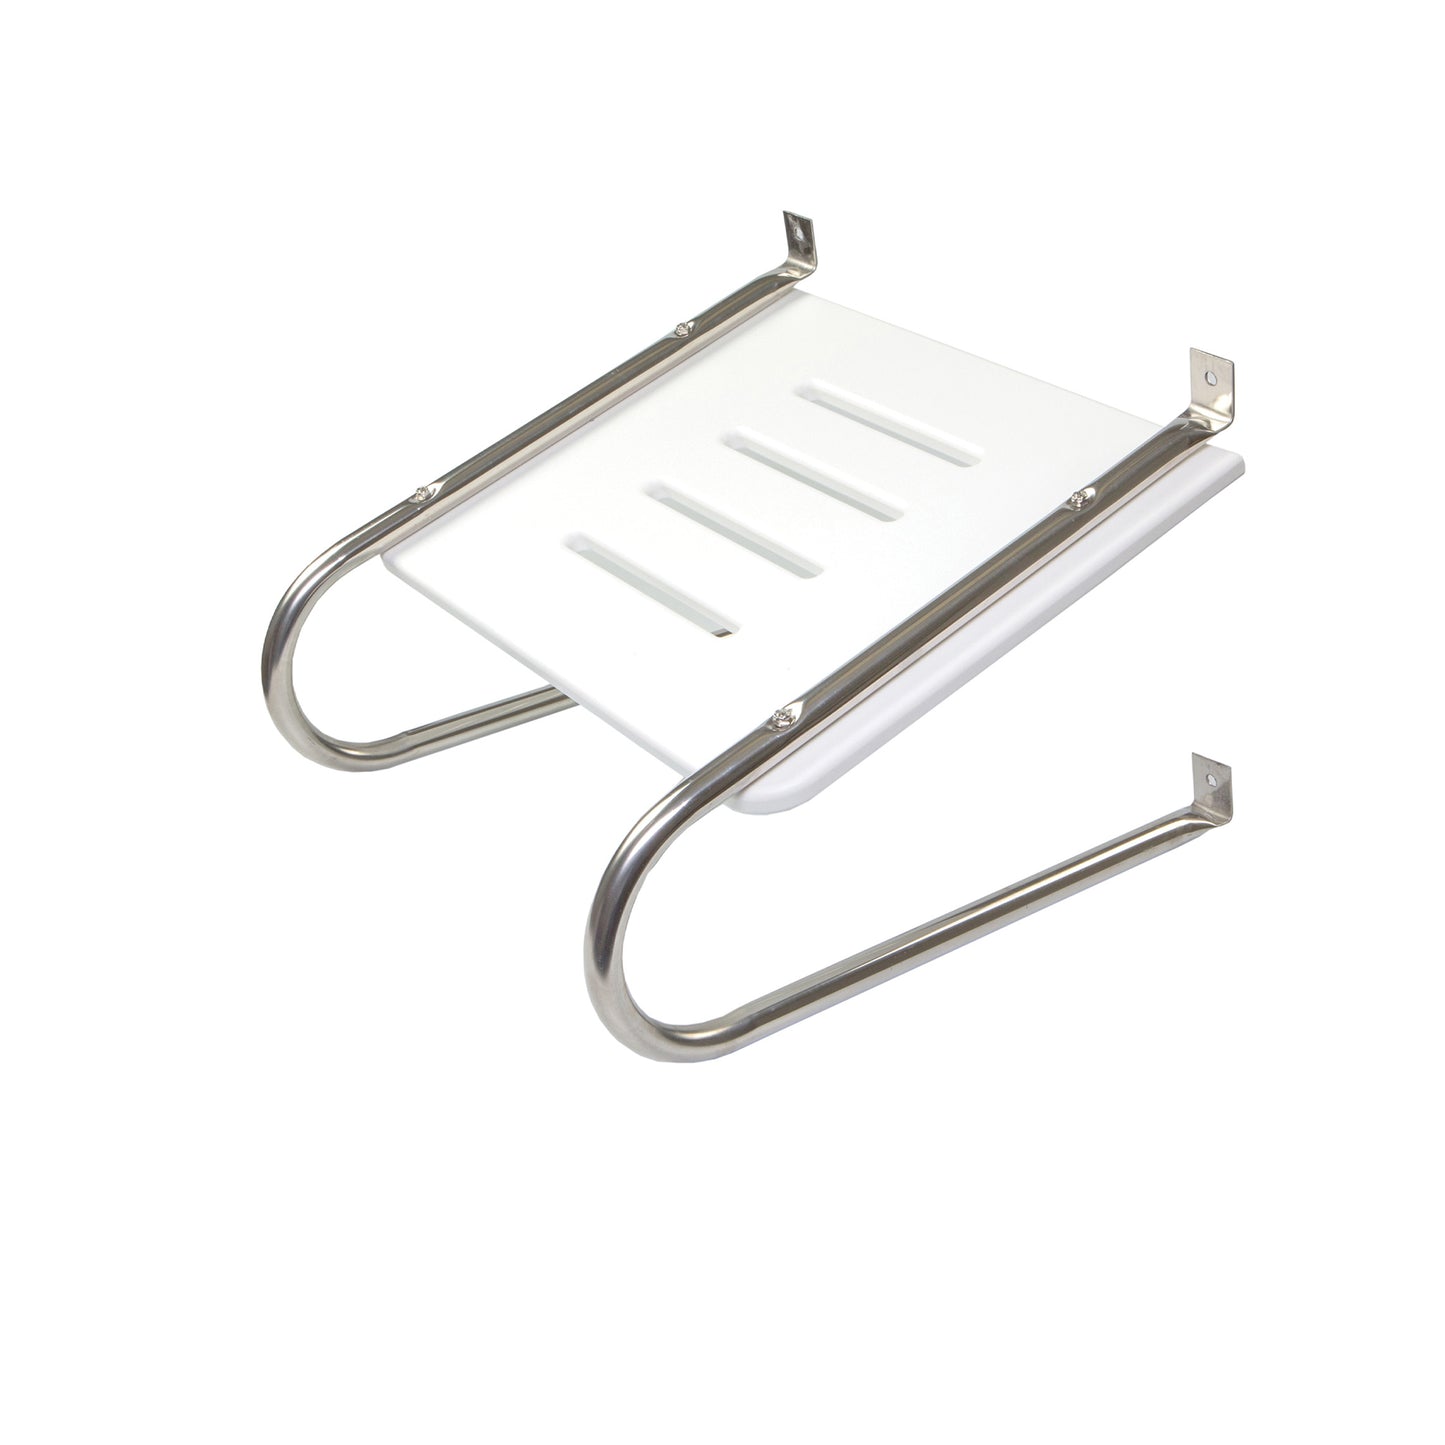 White Poly Swim Platform with Mounting Hardware for Boats with Inboard/Outboard Motors